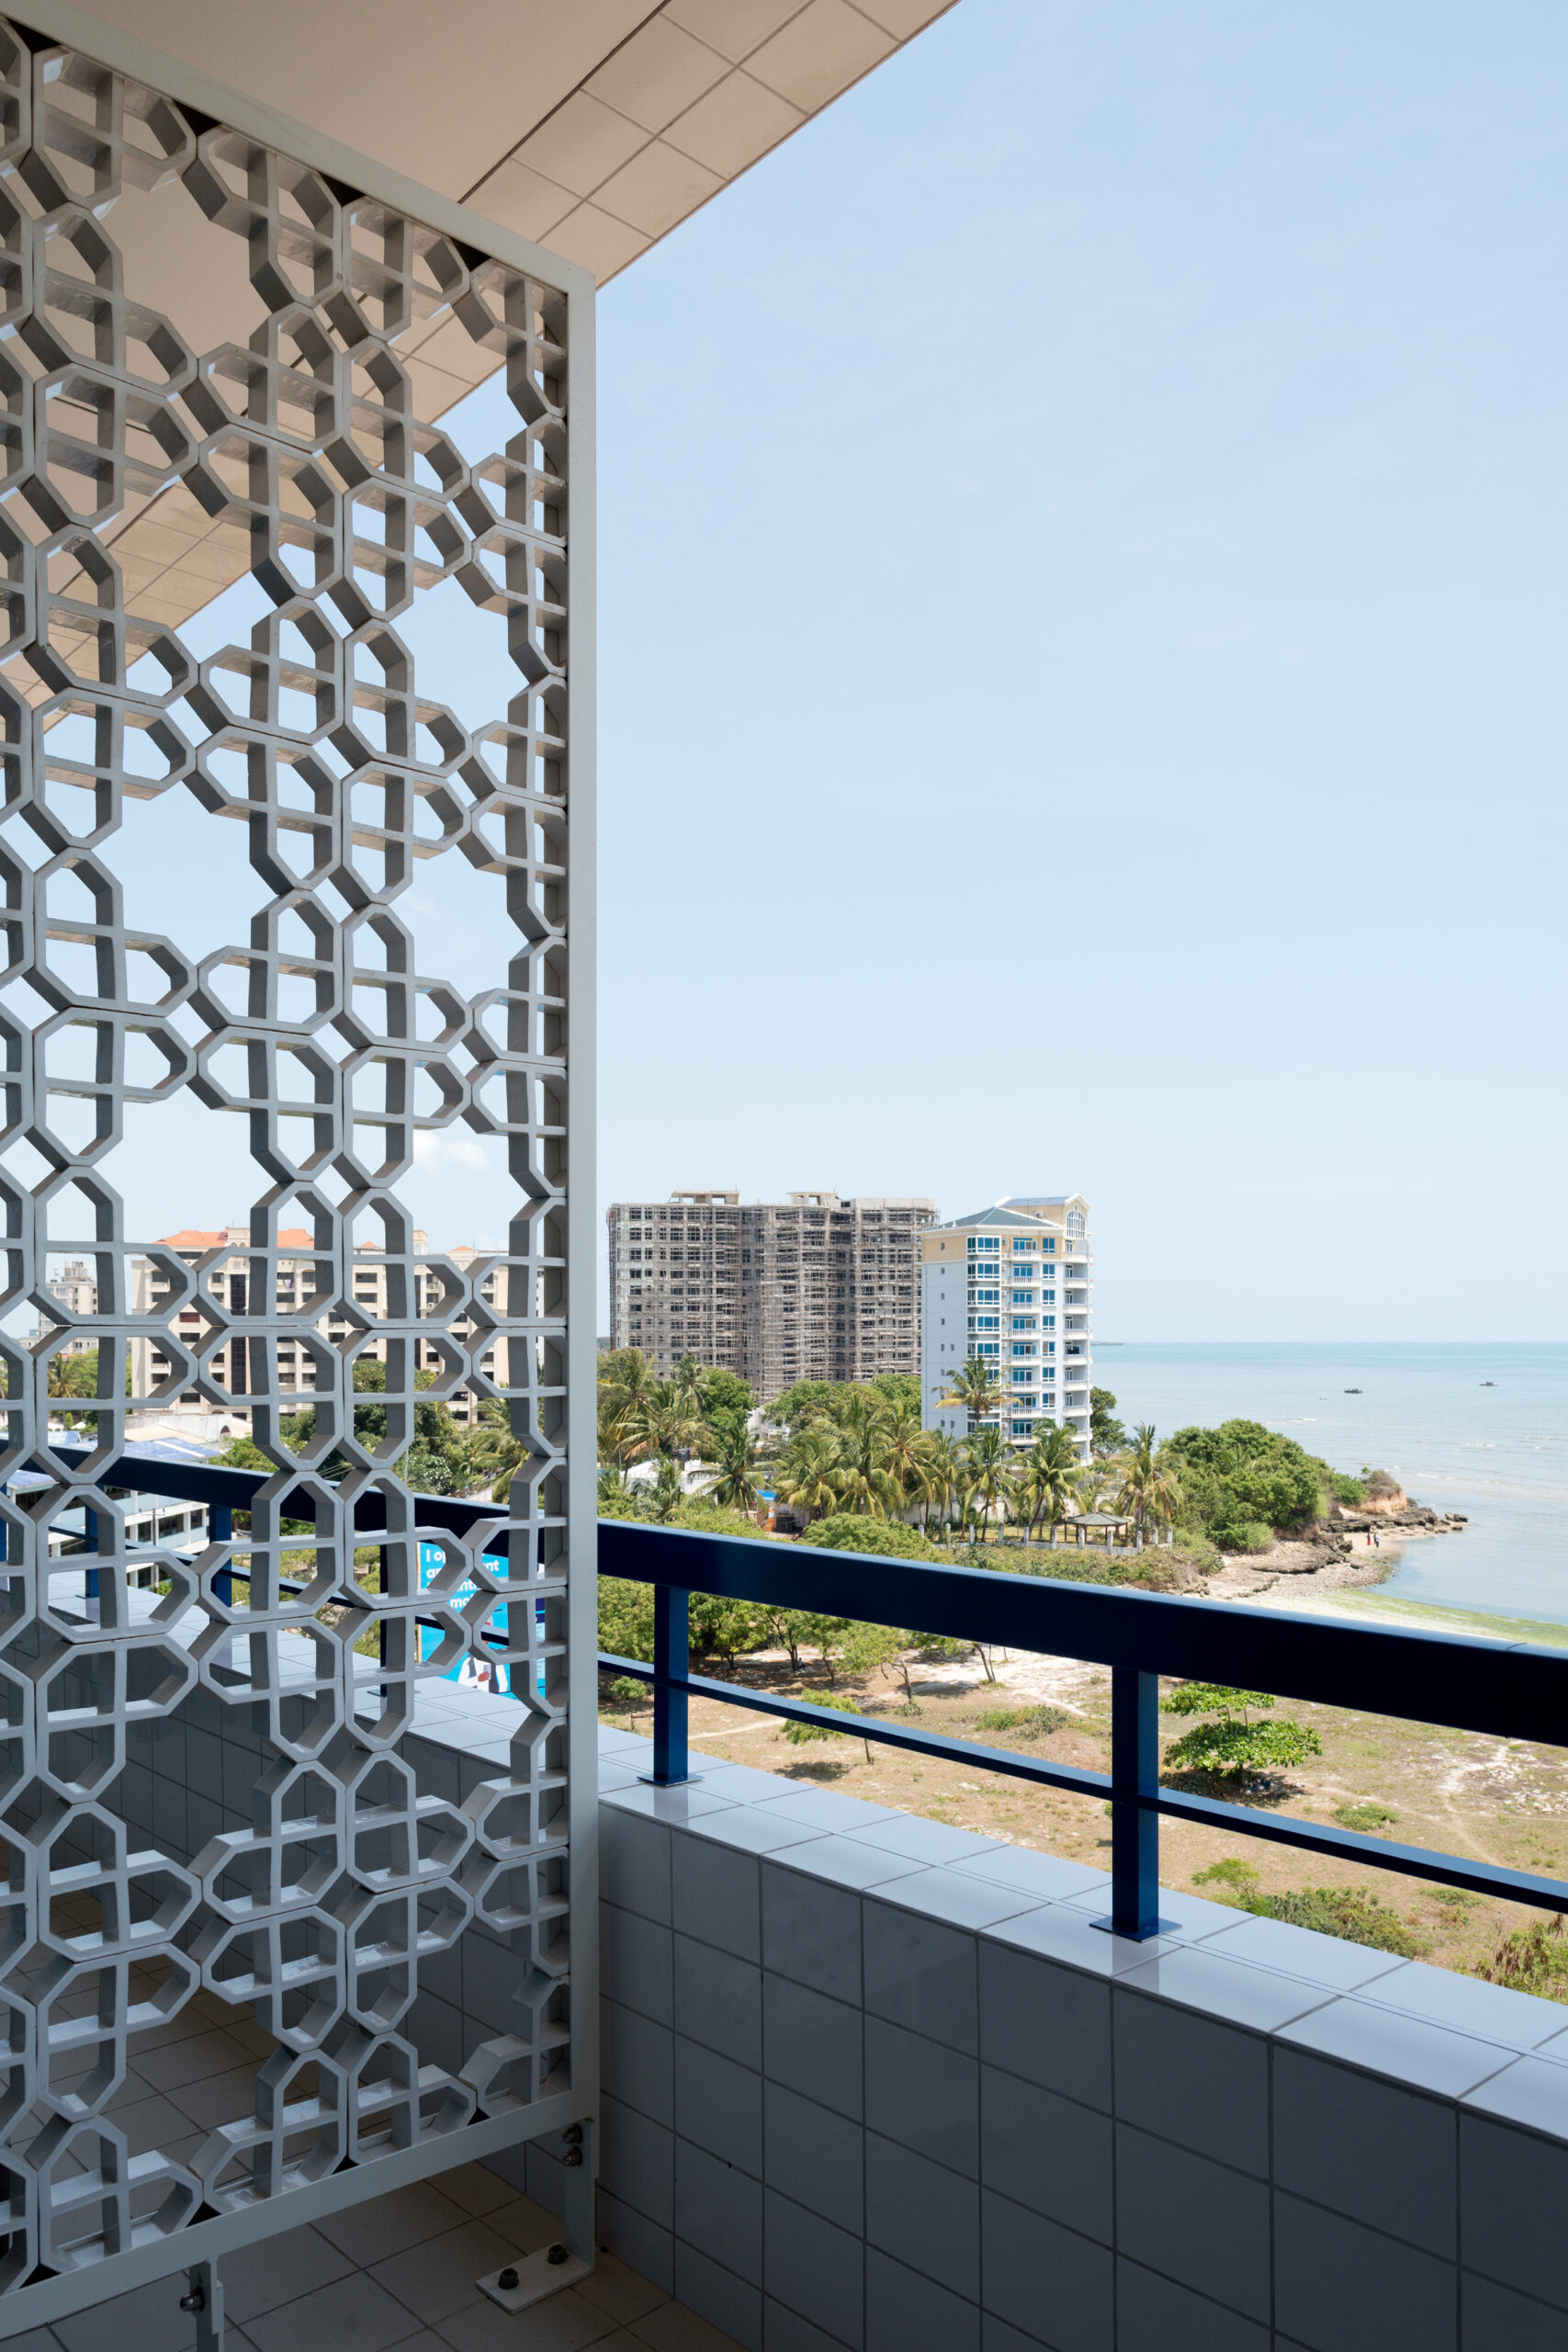 Ocean view from patient room with decorative divider screen on balcony